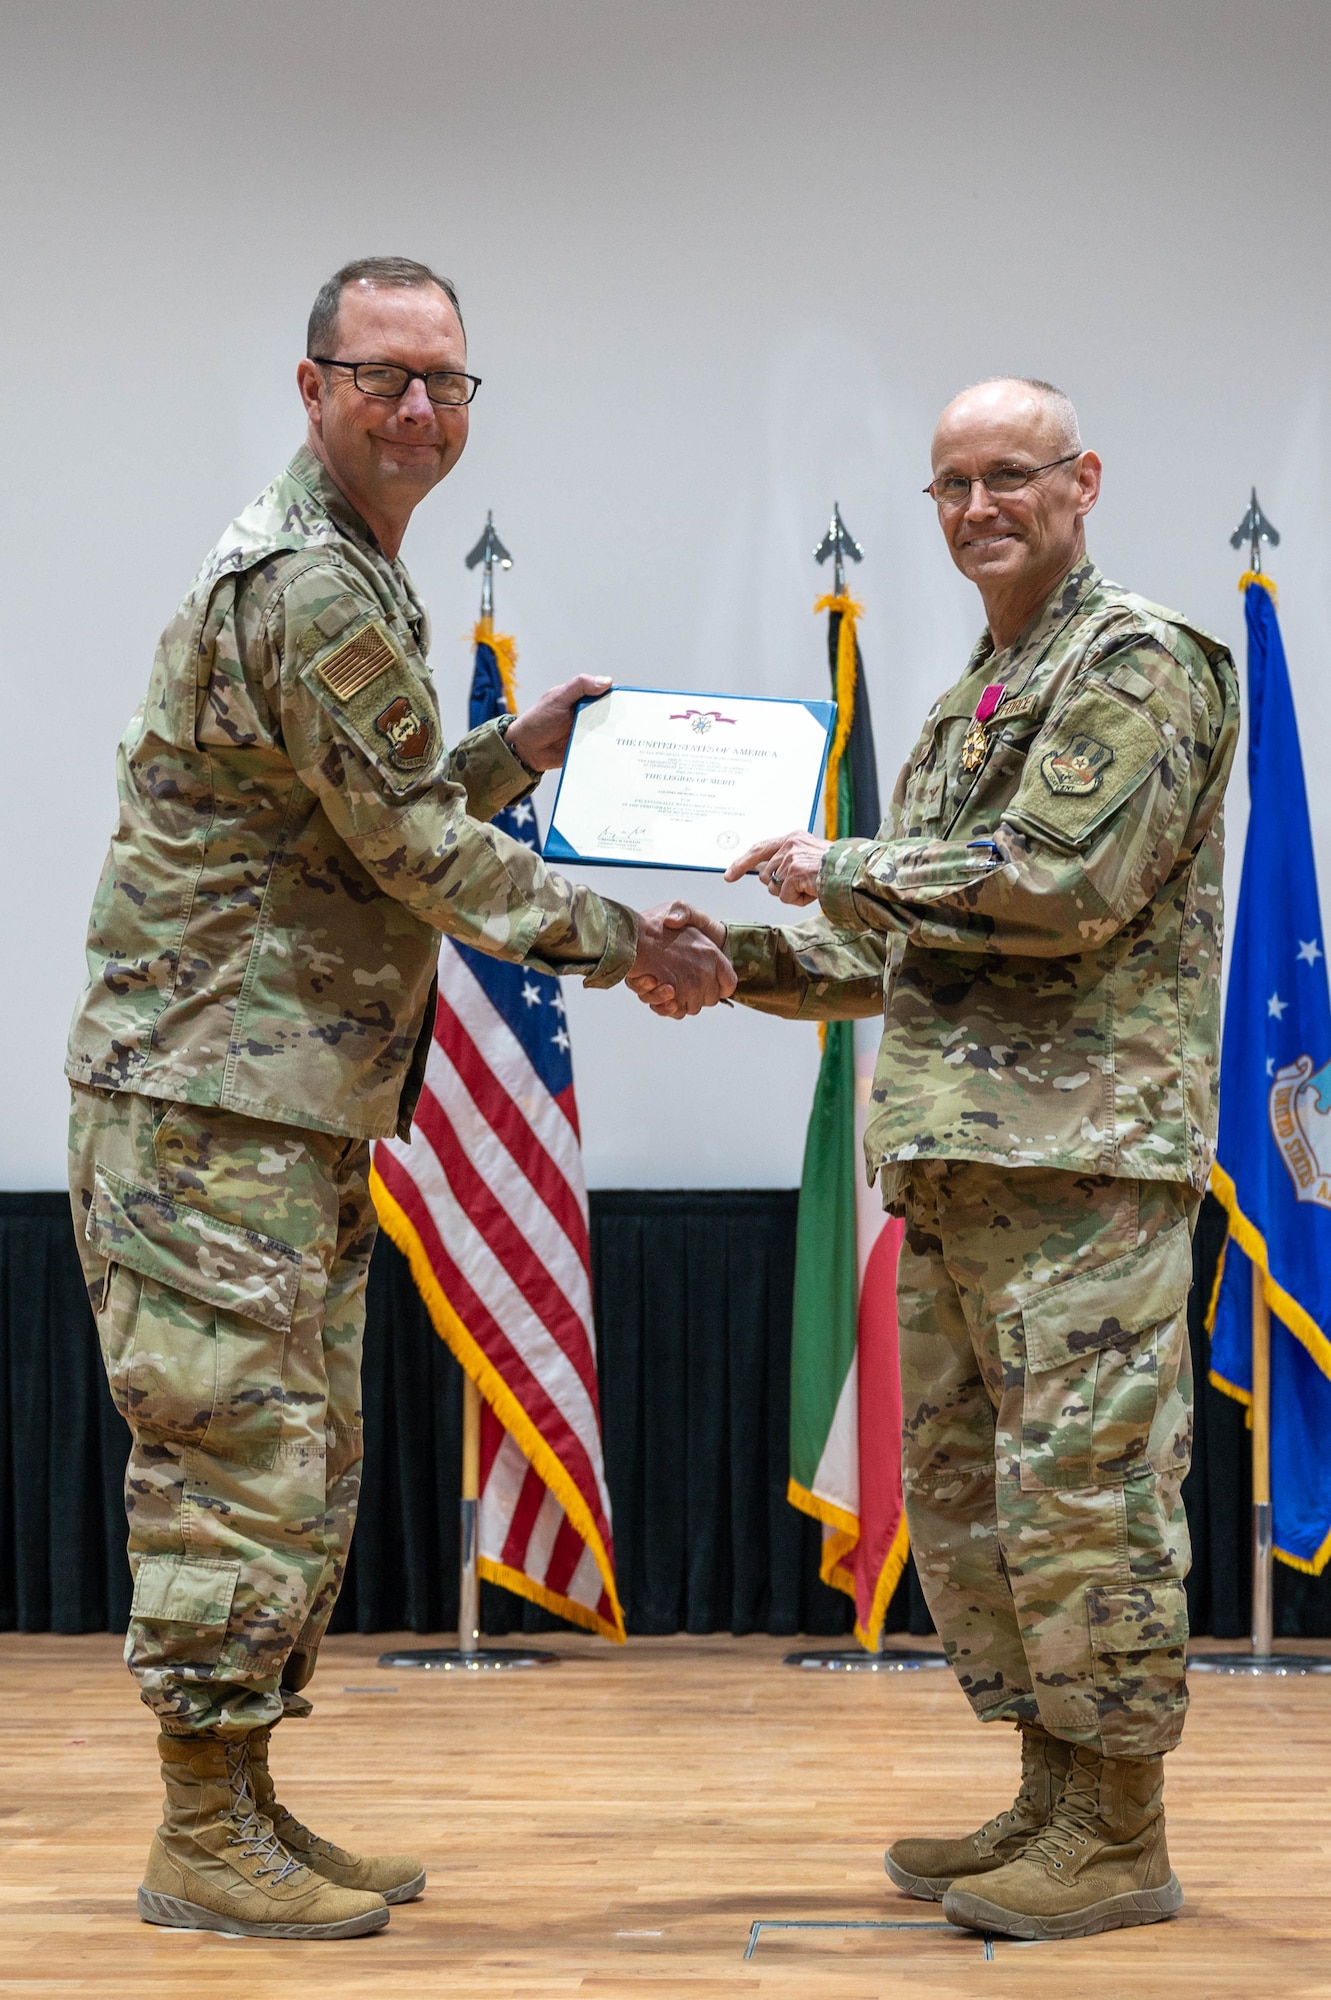 After 21 years, the 386th Expeditionary Medical Group was inactivated May 30, 20221, as the 386th Air Expeditionary Wing shifts from an expeditionary group construct to the Air Staff model.